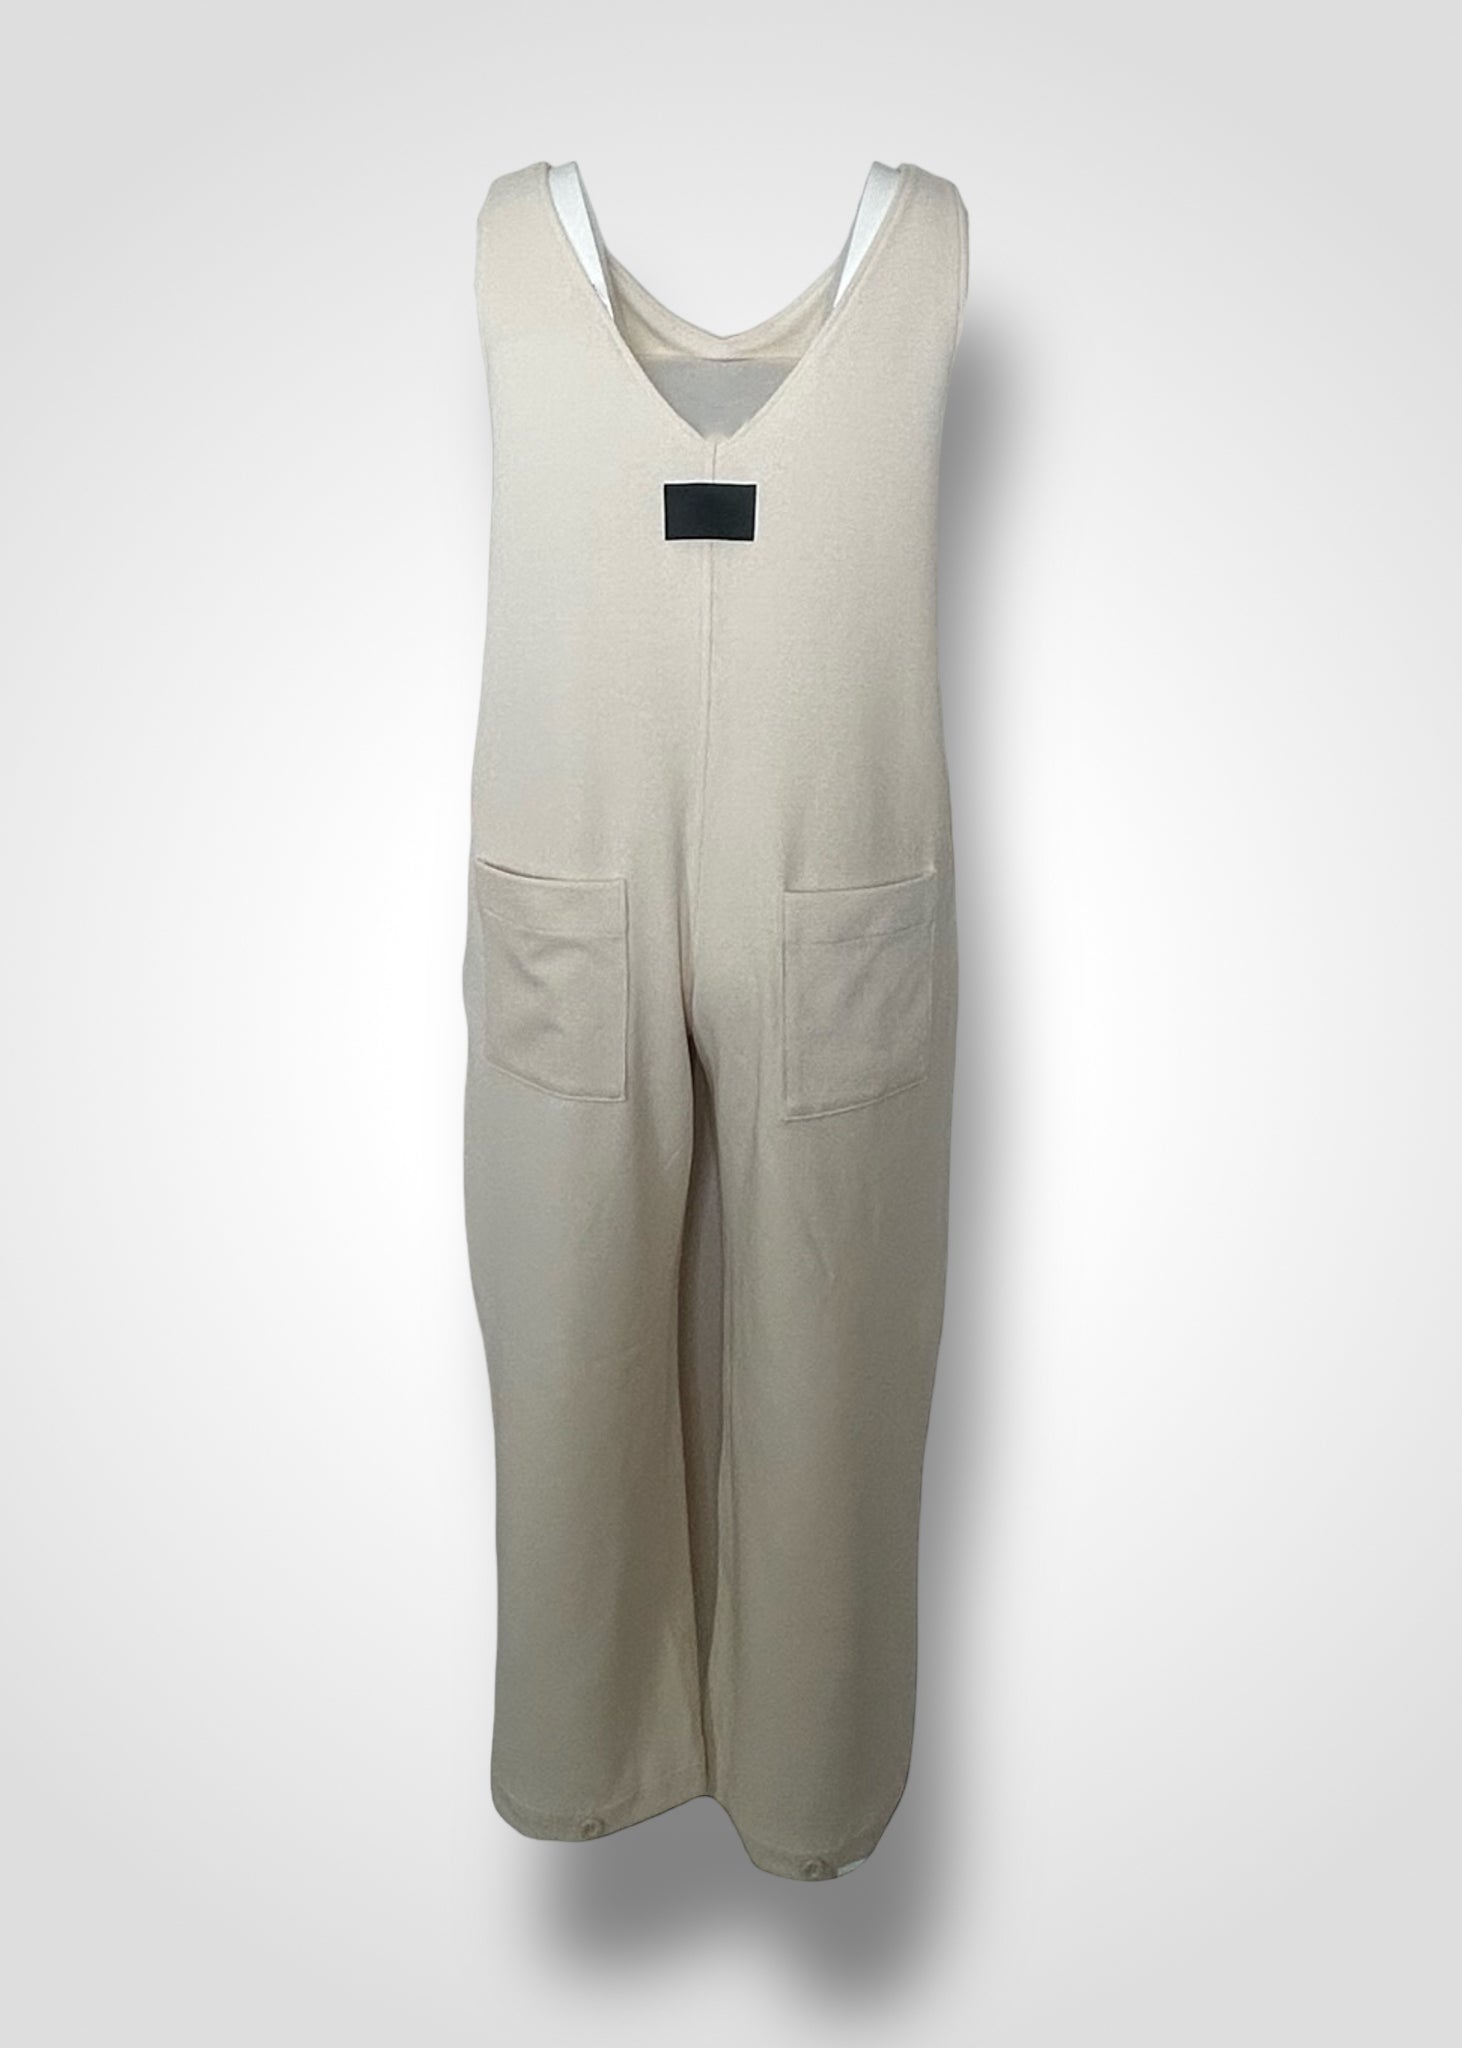 13 GRETEL OVERALLS / STRETCH DOUBLE JERSEY - C10 – COGTHEBIGSMOKE